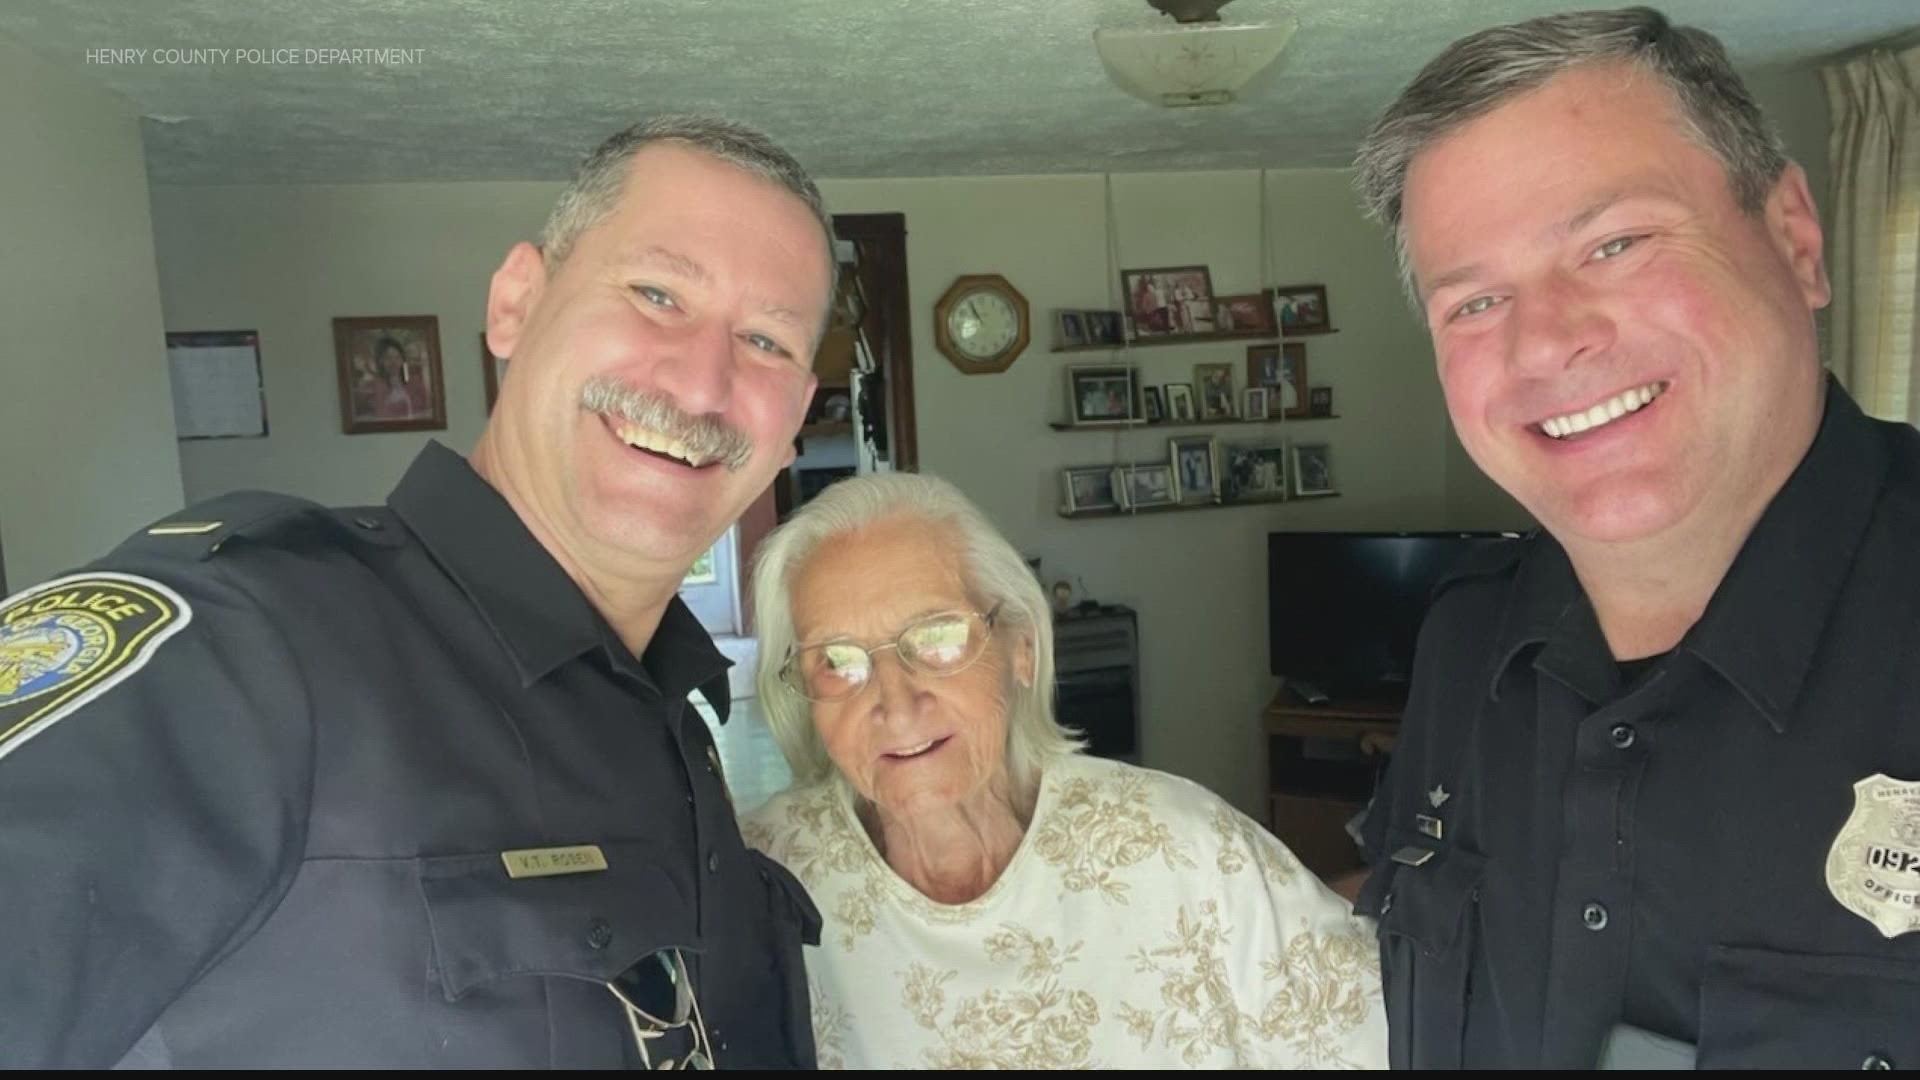 Here's a look at how two Henry County Police officers surprised Ms. Florence Martin.